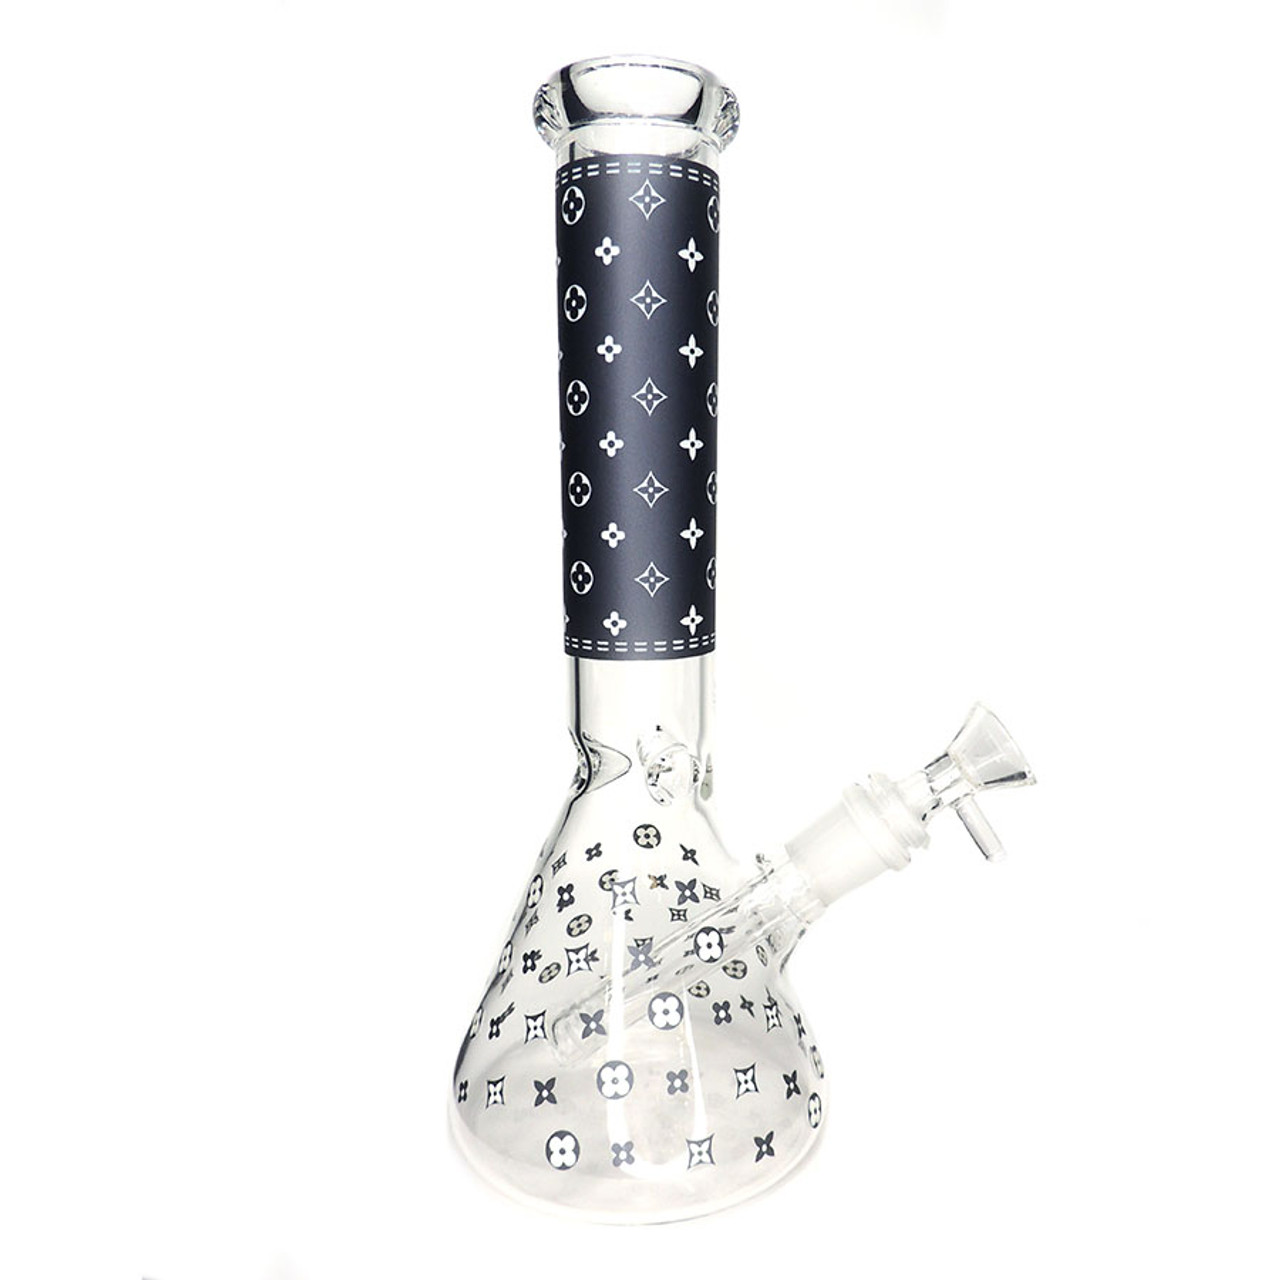 10" KZ2 Glass Water Pipe - Assorted